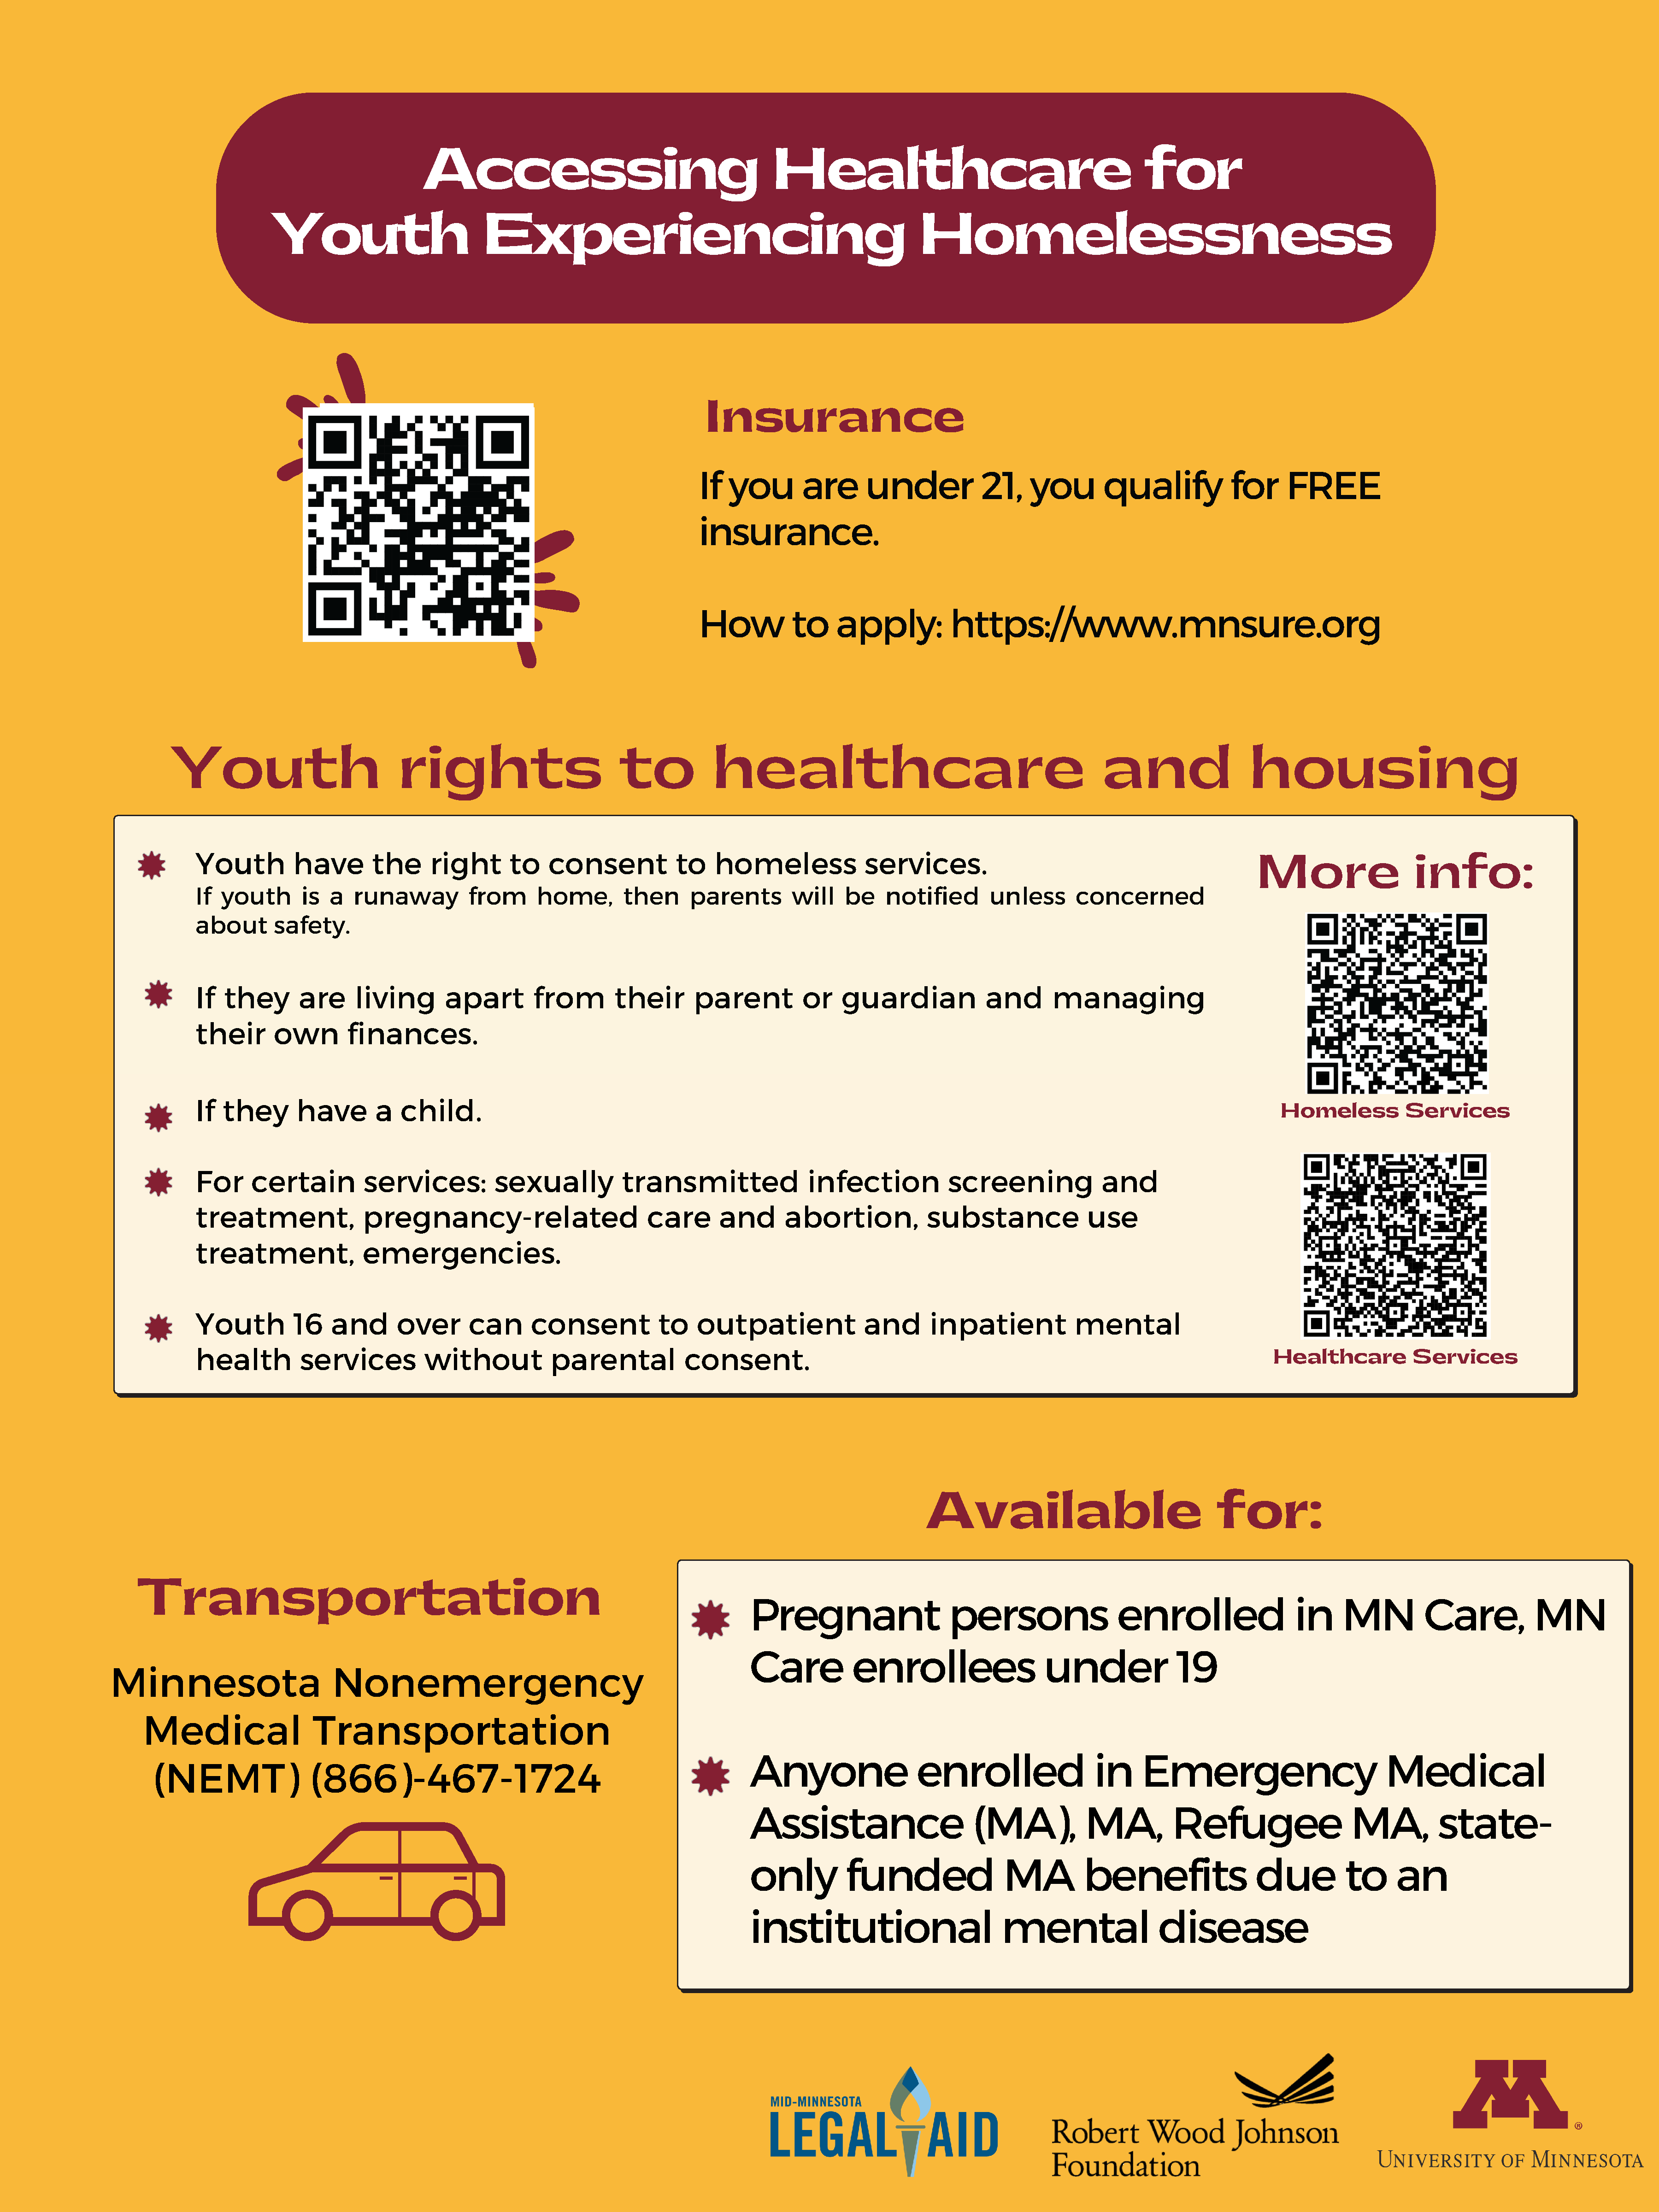 One page resource for accessing healthcare for unhoused youth.